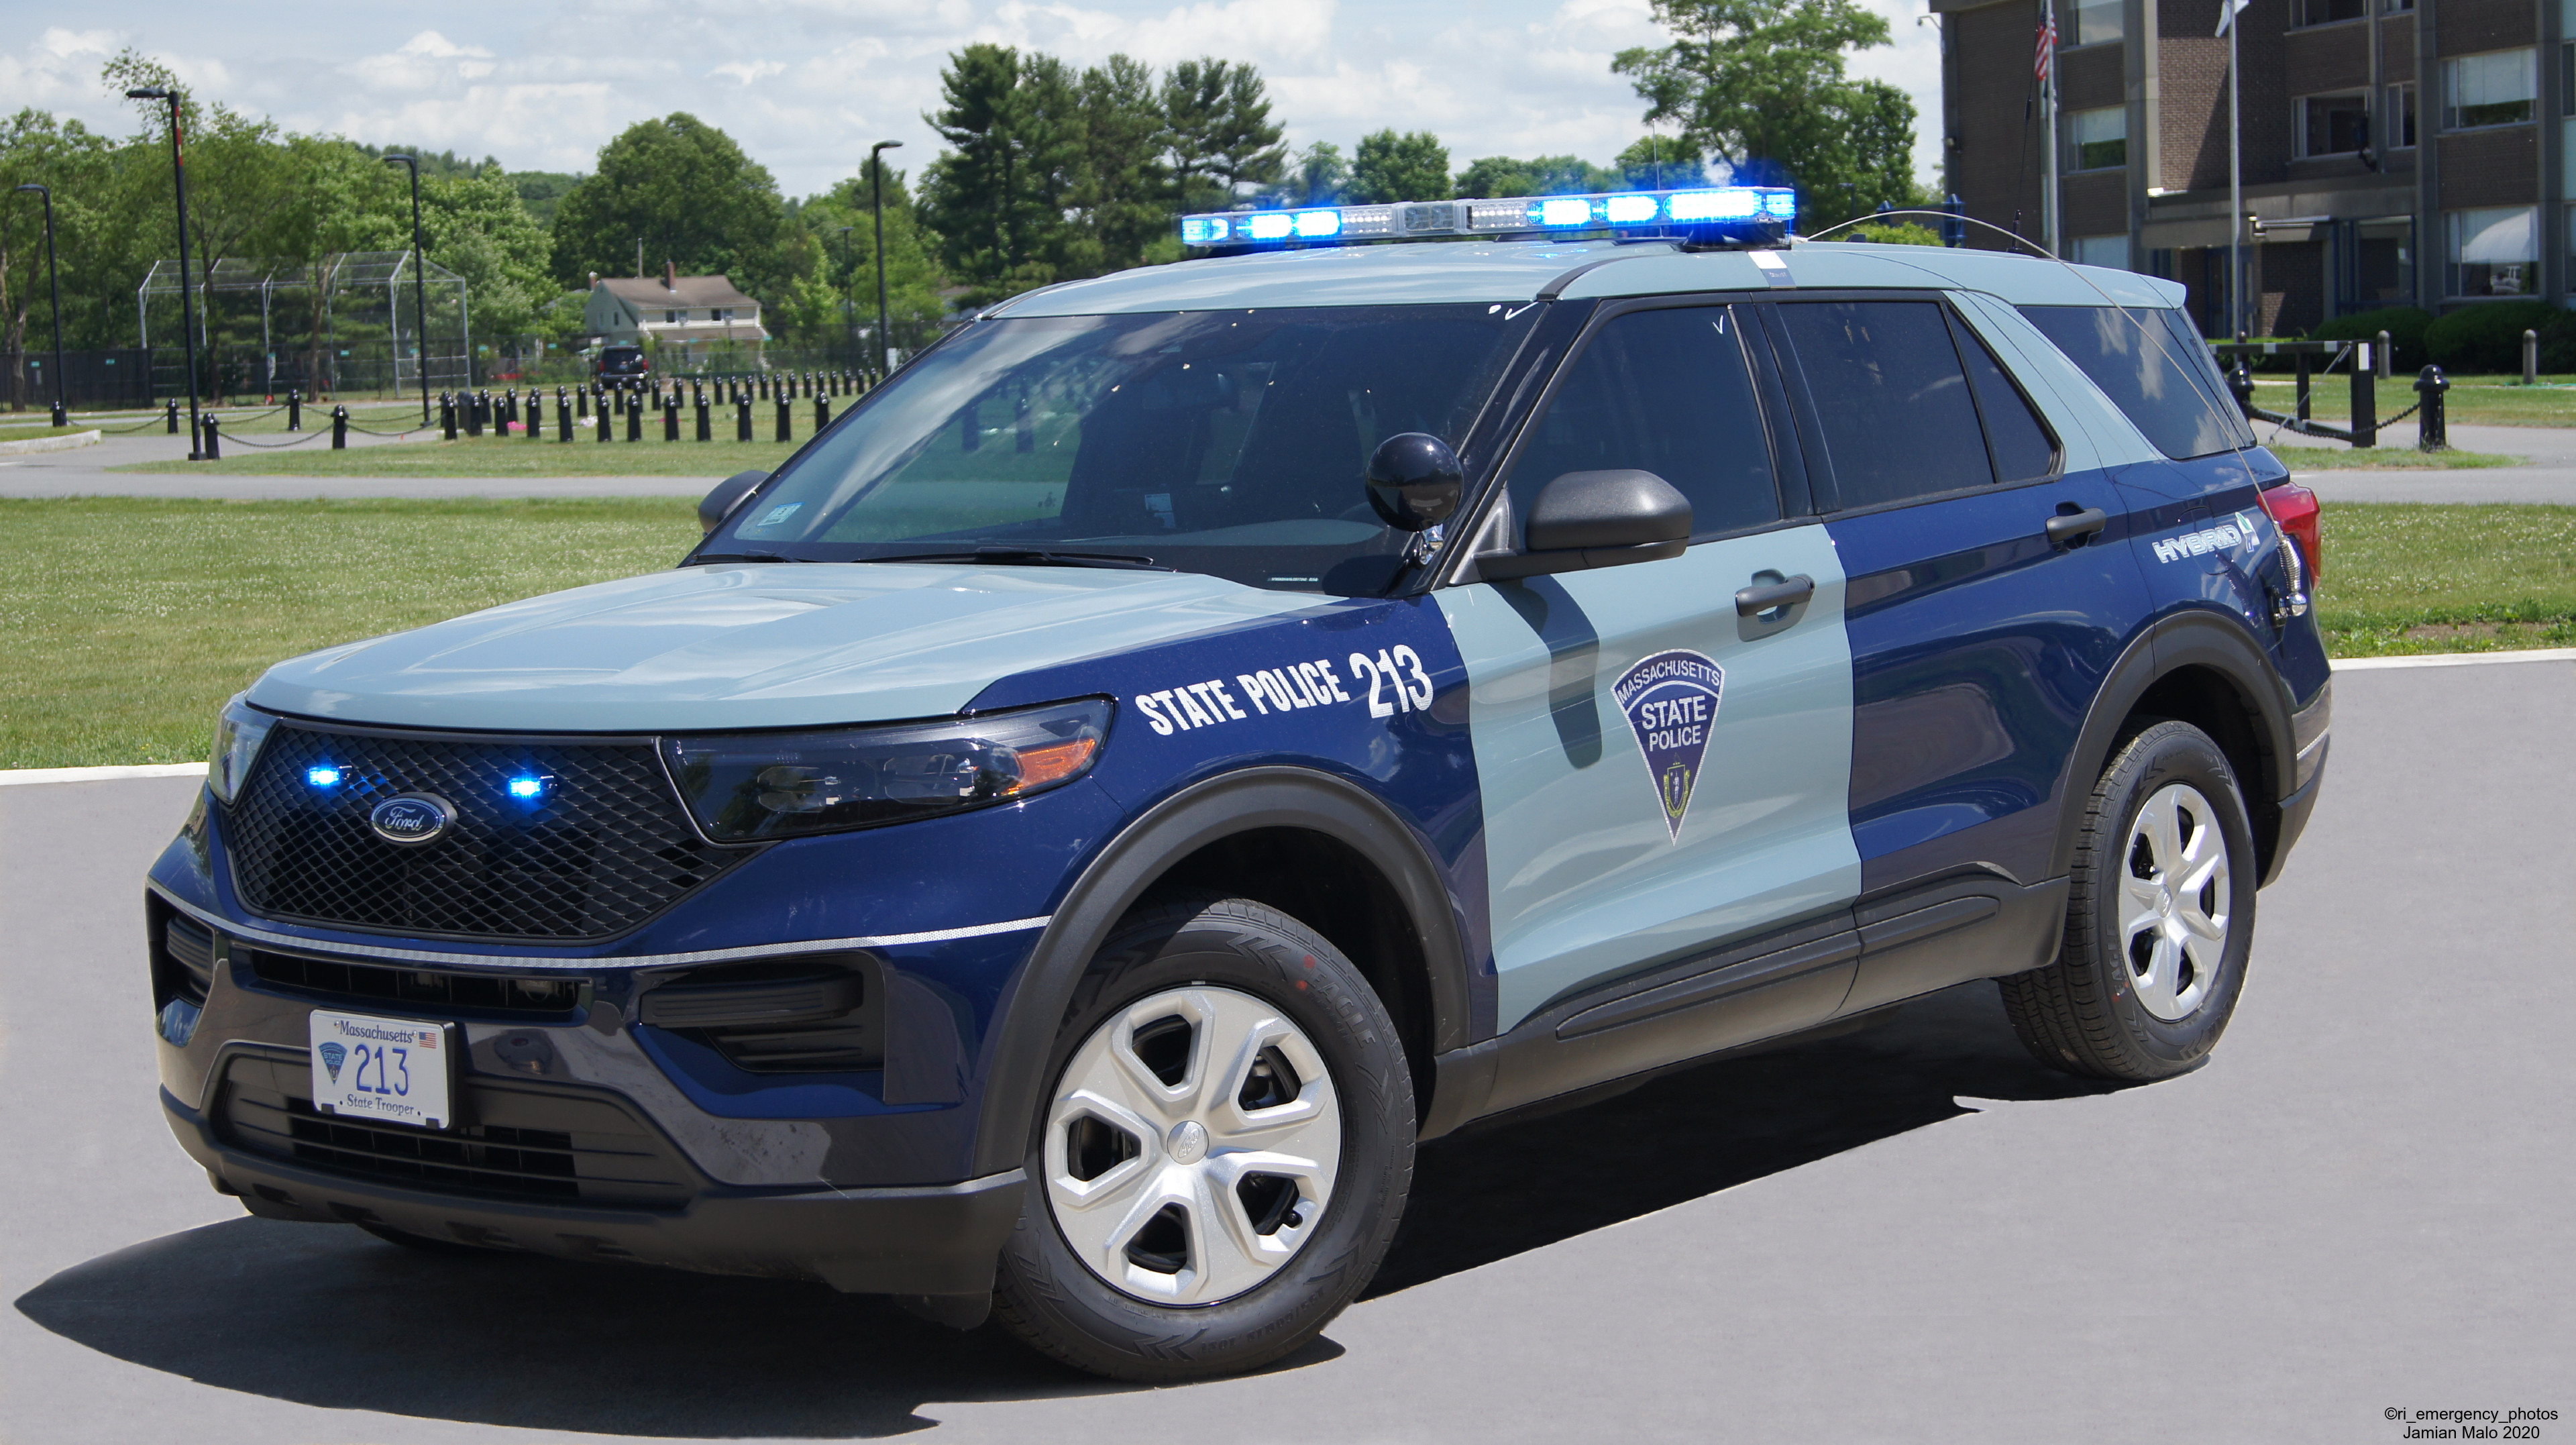 A photo  of Massachusetts State Police
            Cruiser 213, a 2020 Ford Police Interceptor Utility             taken by Jamian Malo